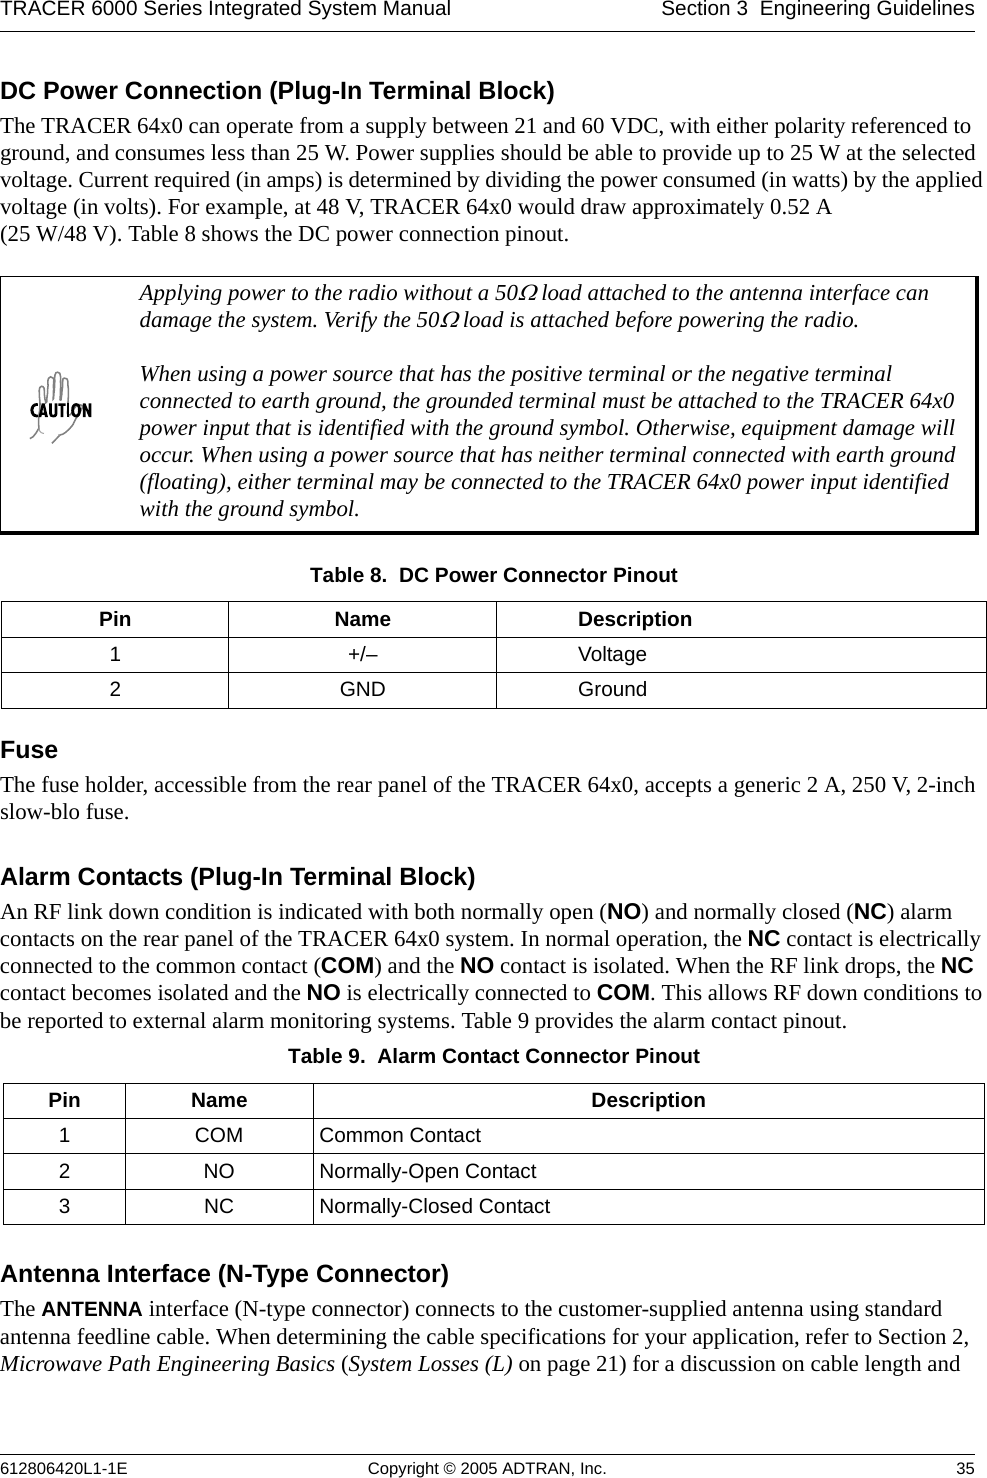 TRACER 6000 Series Integrated System Manual Section 3  Engineering Guidelines612806420L1-1E Copyright © 2005 ADTRAN, Inc. 35DC Power Connection (Plug-In Terminal Block)The TRACER 64x0 can operate from a supply between 21 and 60 VDC, with either polarity referenced to ground, and consumes less than 25 W. Power supplies should be able to provide up to 25 W at the selected voltage. Current required (in amps) is determined by dividing the power consumed (in watts) by the applied voltage (in volts). For example, at 48 V, TRACER 64x0 would draw approximately 0.52 A  (25 W/48 V). Table 8 shows the DC power connection pinout.FuseThe fuse holder, accessible from the rear panel of the TRACER 64x0, accepts a generic 2 A, 250 V, 2-inch slow-blo fuse.Alarm Contacts (Plug-In Terminal Block)An RF link down condition is indicated with both normally open (NO) and normally closed (NC) alarm contacts on the rear panel of the TRACER 64x0 system. In normal operation, the NC contact is electrically connected to the common contact (COM) and the NO contact is isolated. When the RF link drops, the NC contact becomes isolated and the NO is electrically connected to COM. This allows RF down conditions to be reported to external alarm monitoring systems. Table 9 provides the alarm contact pinout.Antenna Interface (N-Type Connector)The ANTENNA interface (N-type connector) connects to the customer-supplied antenna using standard antenna feedline cable. When determining the cable specifications for your application, refer to Section 2, Microwave Path Engineering Basics (System Losses (L) on page 21) for a discussion on cable length and Applying power to the radio without a 50Ω load attached to the antenna interface can damage the system. Verify the 50Ω load is attached before powering the radio.When using a power source that has the positive terminal or the negative terminal connected to earth ground, the grounded terminal must be attached to the TRACER 64x0 power input that is identified with the ground symbol. Otherwise, equipment damage will occur. When using a power source that has neither terminal connected with earth ground (floating), either terminal may be connected to the TRACER 64x0 power input identified with the ground symbol.Table 8.  DC Power Connector Pinout Pin Name Description1+/– Voltage2GND GroundTable 9.  Alarm Contact Connector Pinout Pin Name Description1 COM Common Contact2 NO Normally-Open Contact3 NC Normally-Closed Contact